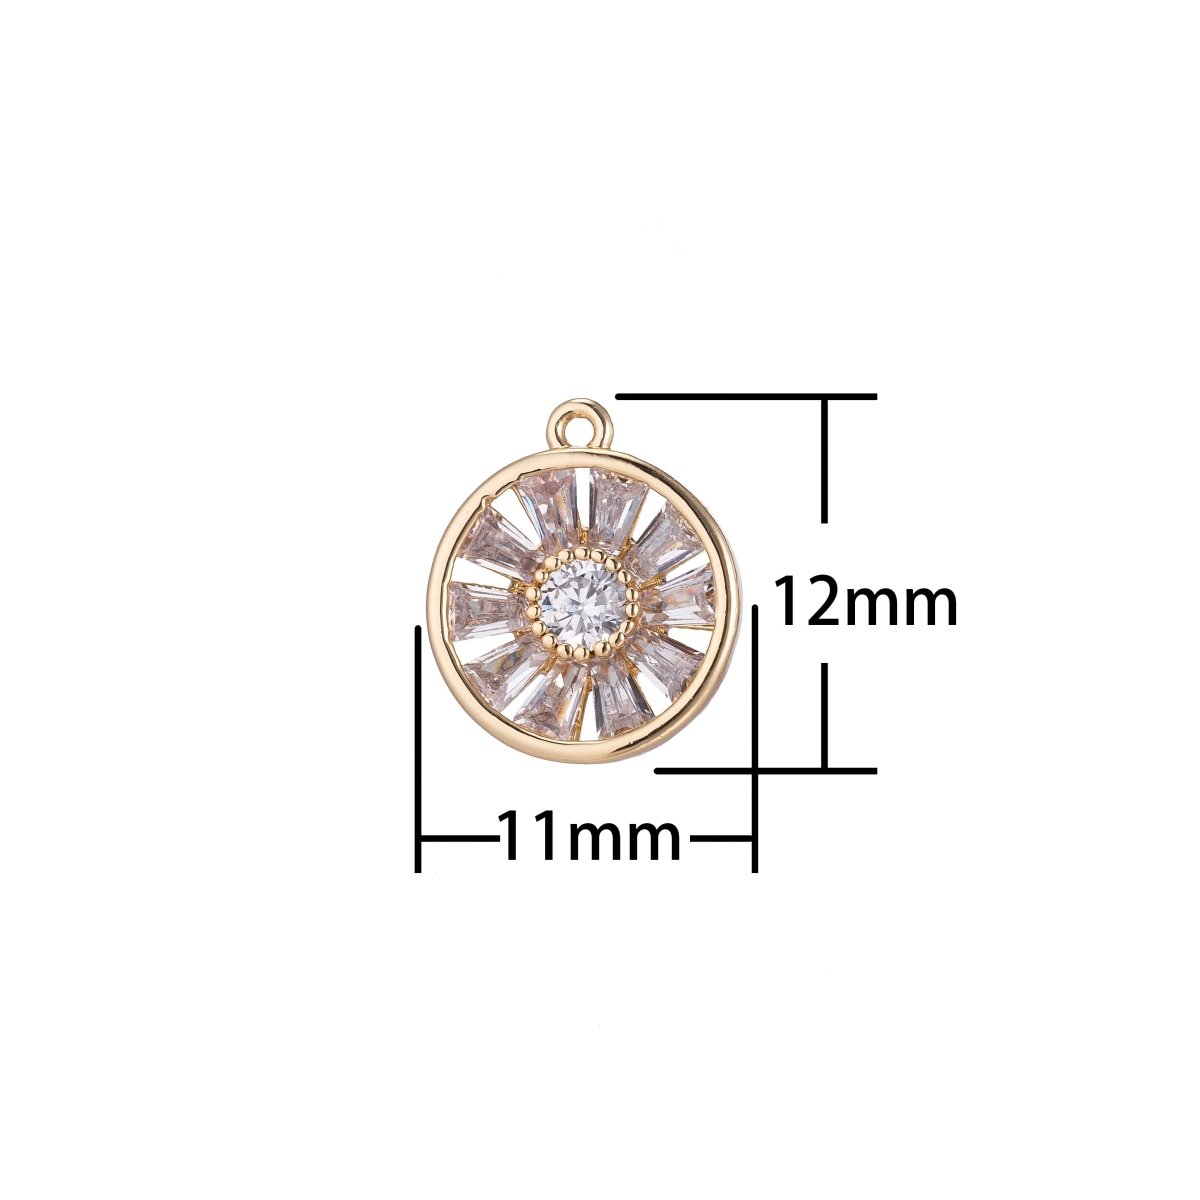 Dainty Round Flower Charm, Micro Pave CZ Charm, 18K Gold Filled Pendant Wheel Circle Zirconia Crystal Necklace Charm for Jewelry Making, C-387 - DLUXCA